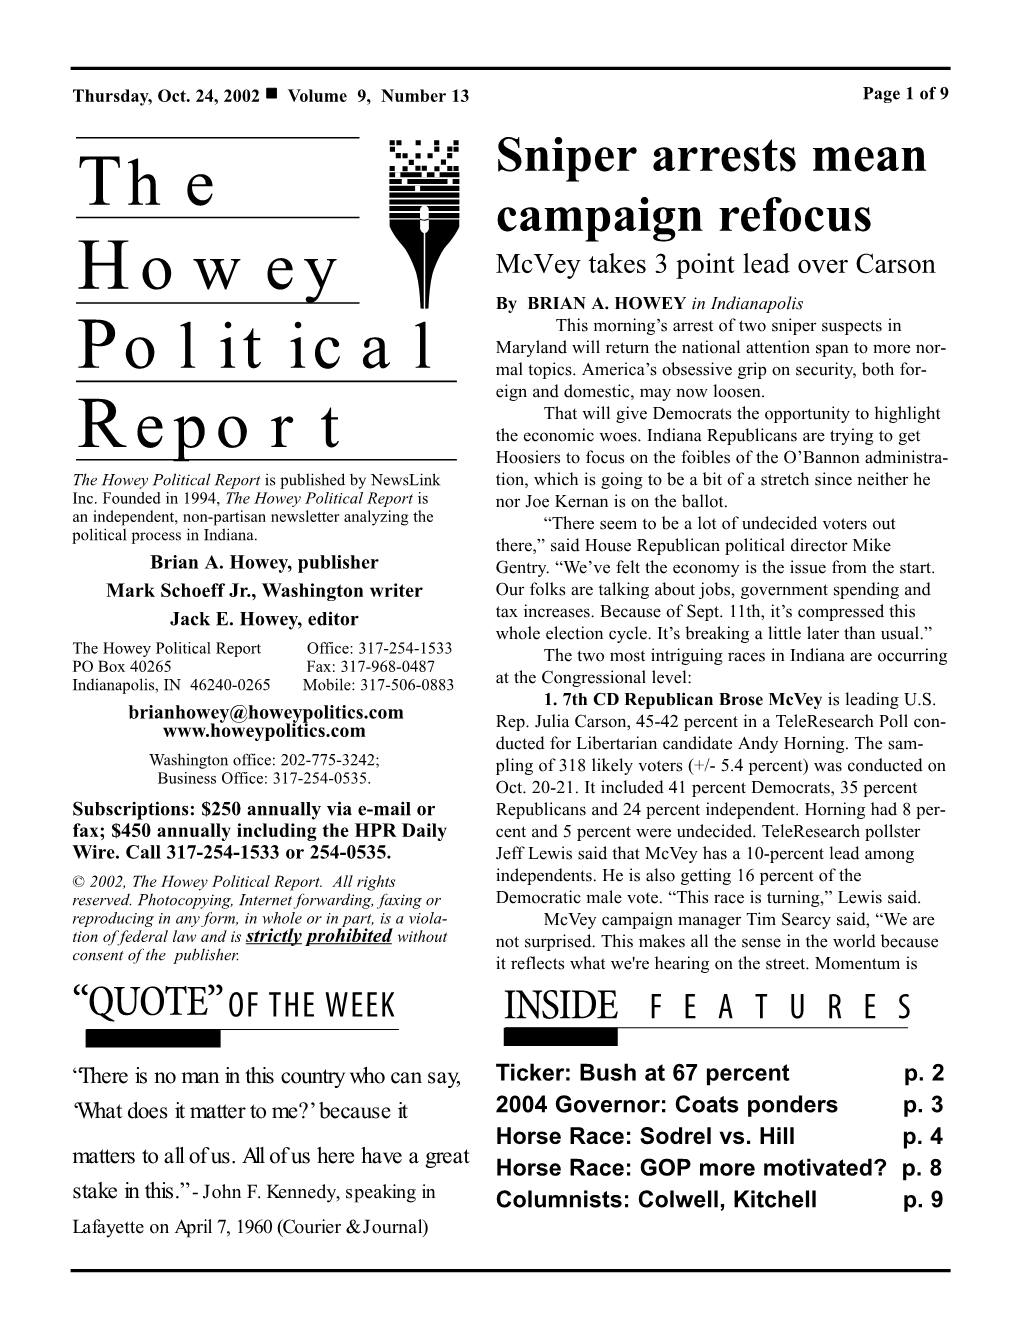 The Howey Political Report Is Published by Newslink Tion, Which Is Going to Be a Bit of a Stretch Since Neither He Inc